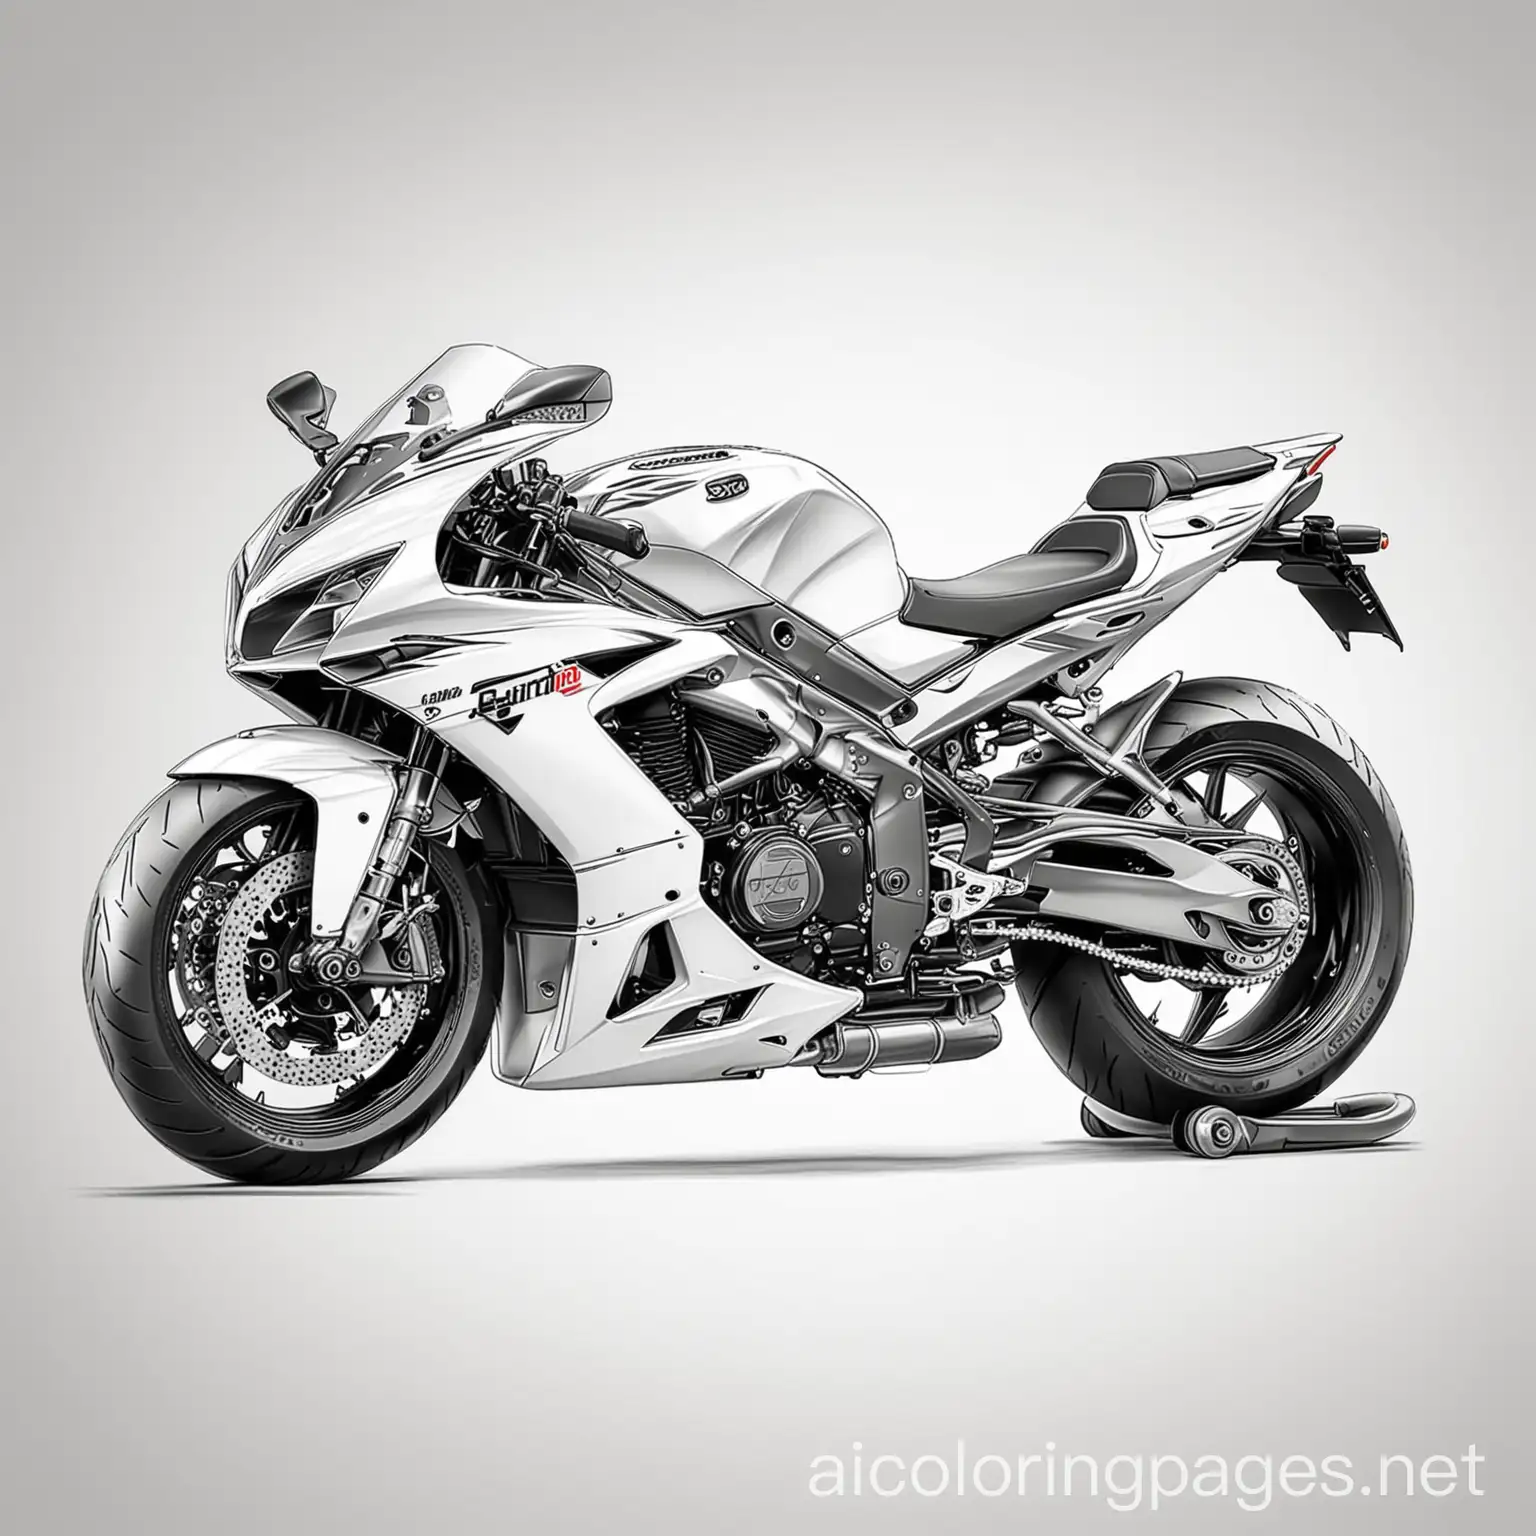 sports motorcycle, Coloring Page, black and white, line art, white background, Simplicity, Ample White Space. The background of the coloring page is plain white to make it easy for young children to color within the lines. The outlines of all the subjects are easy to distinguish, making it simple for kids to color without too much difficulty